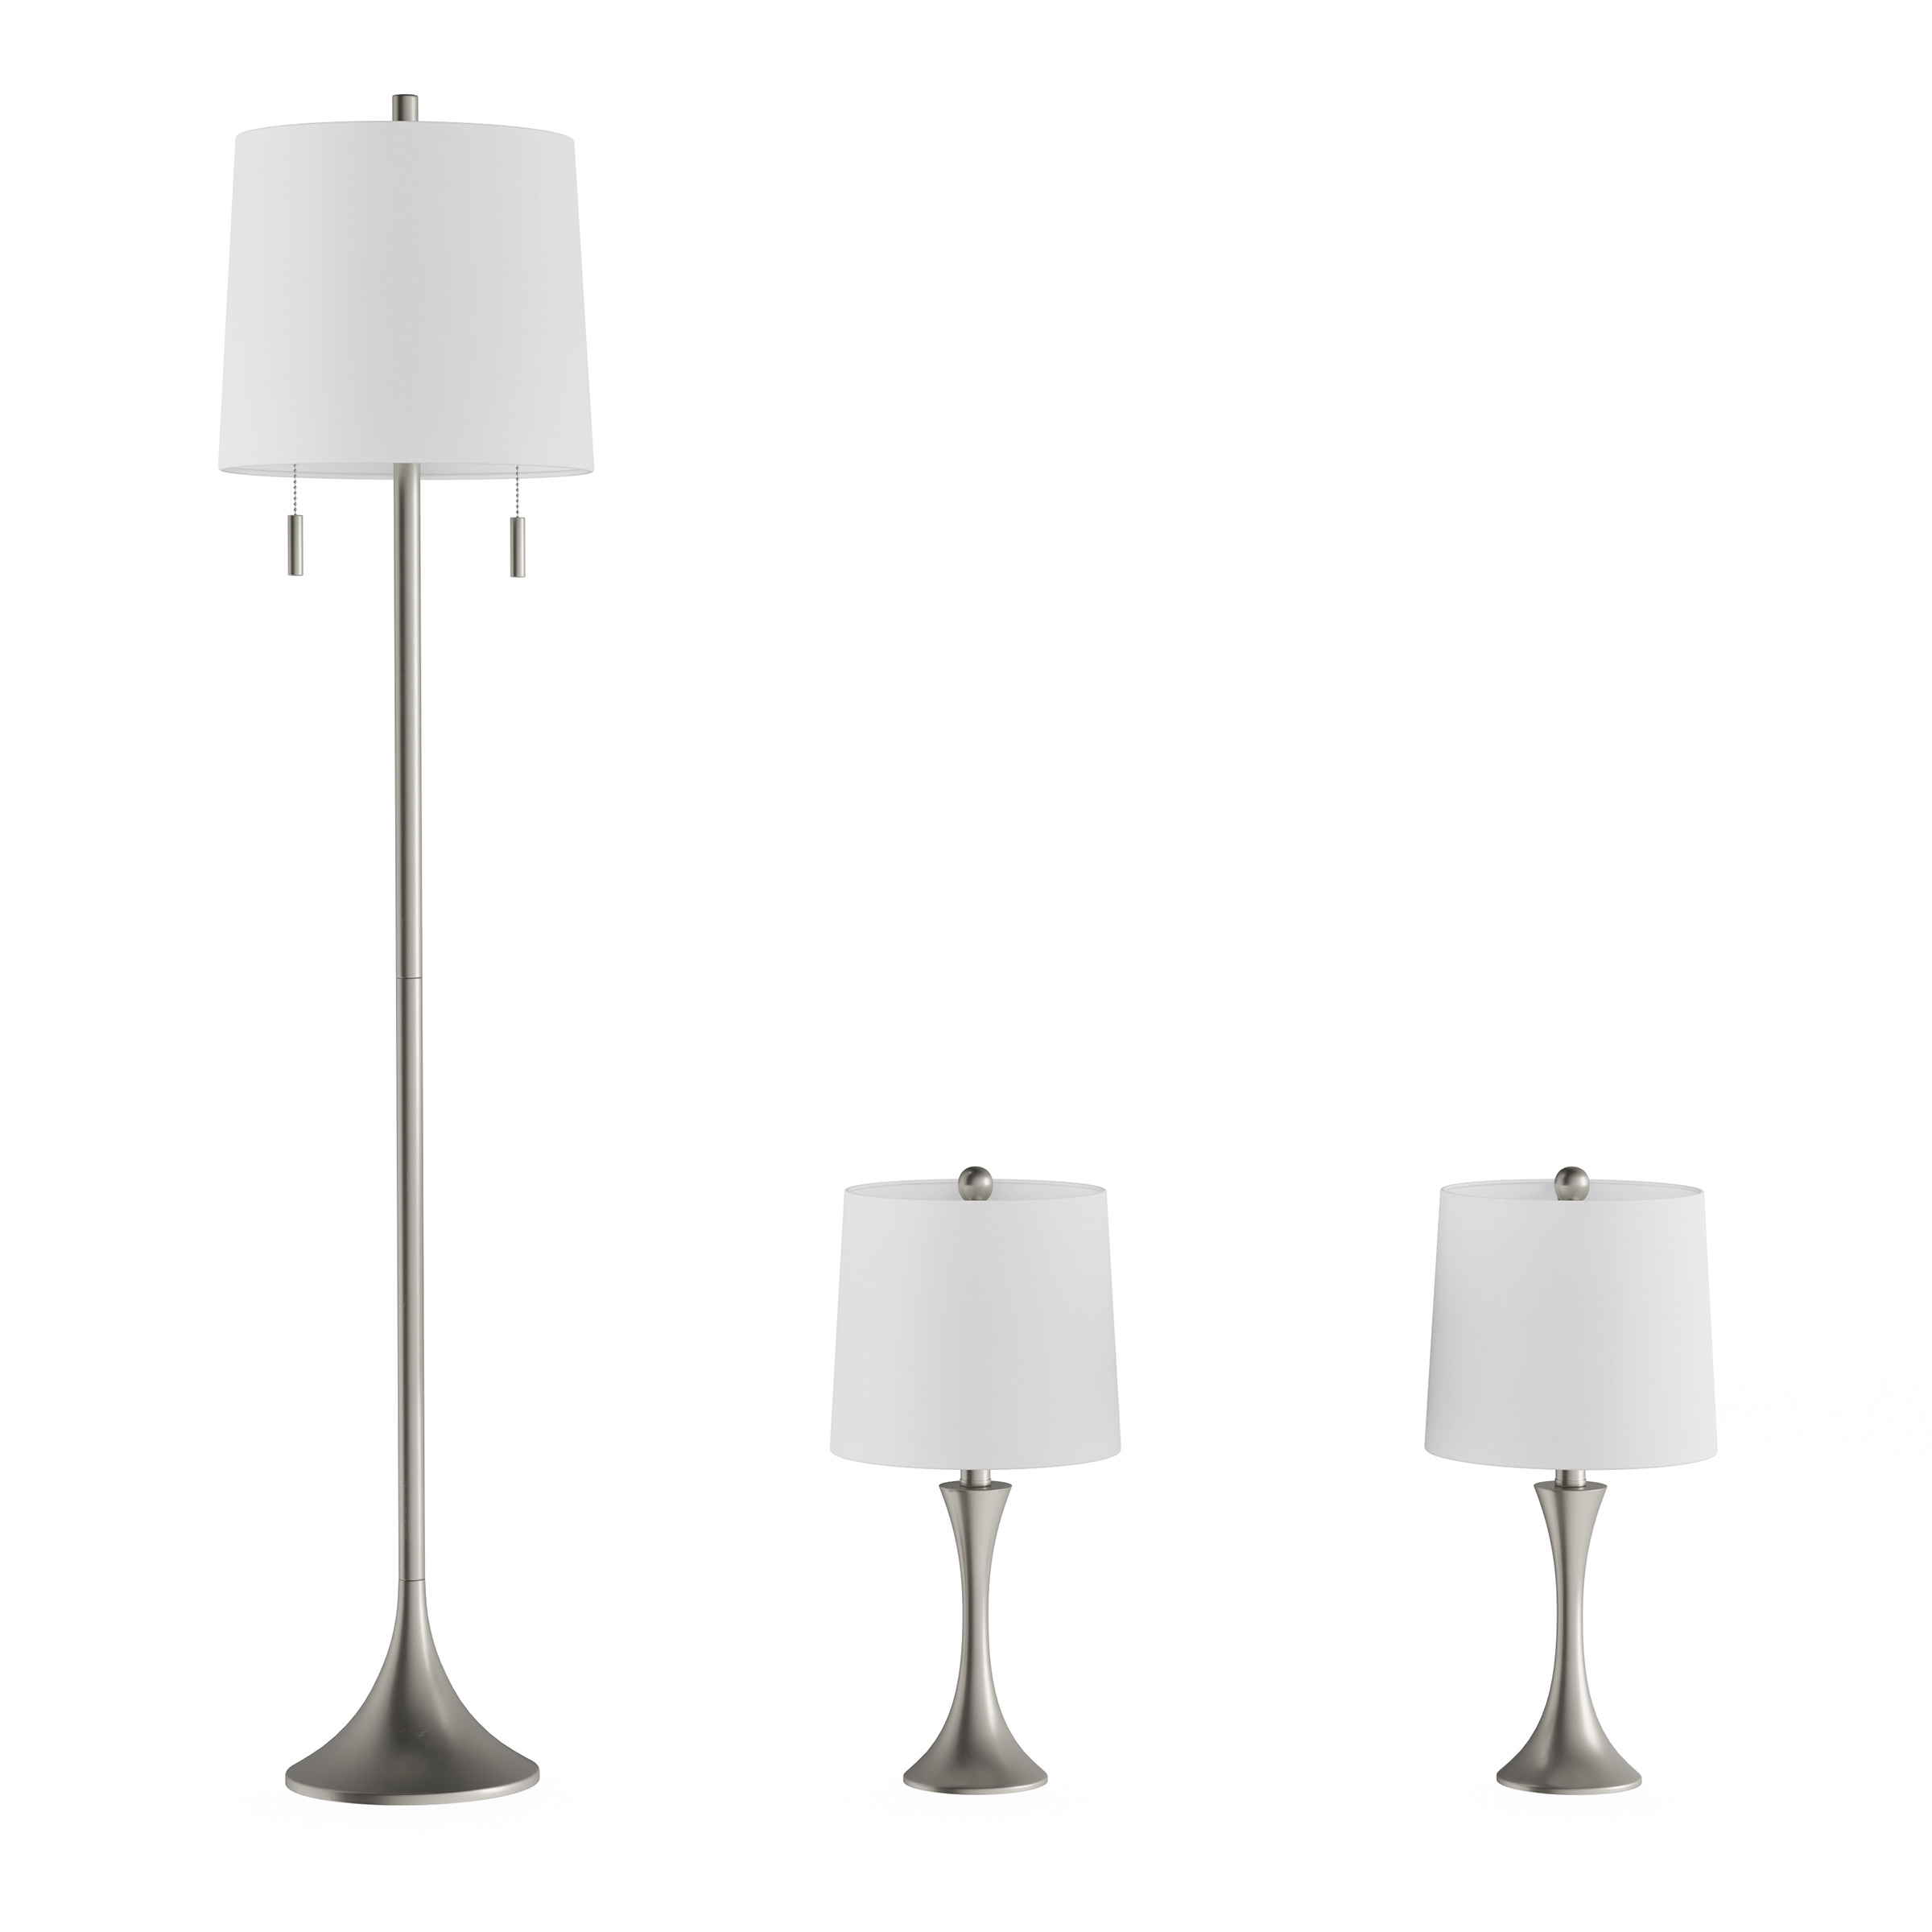 Lavish Home Table and Floor Lamps  Set of 3 Mid-Century Modern Metal Flared Trumpet Base with Energy Efficient LED Light Bulbs